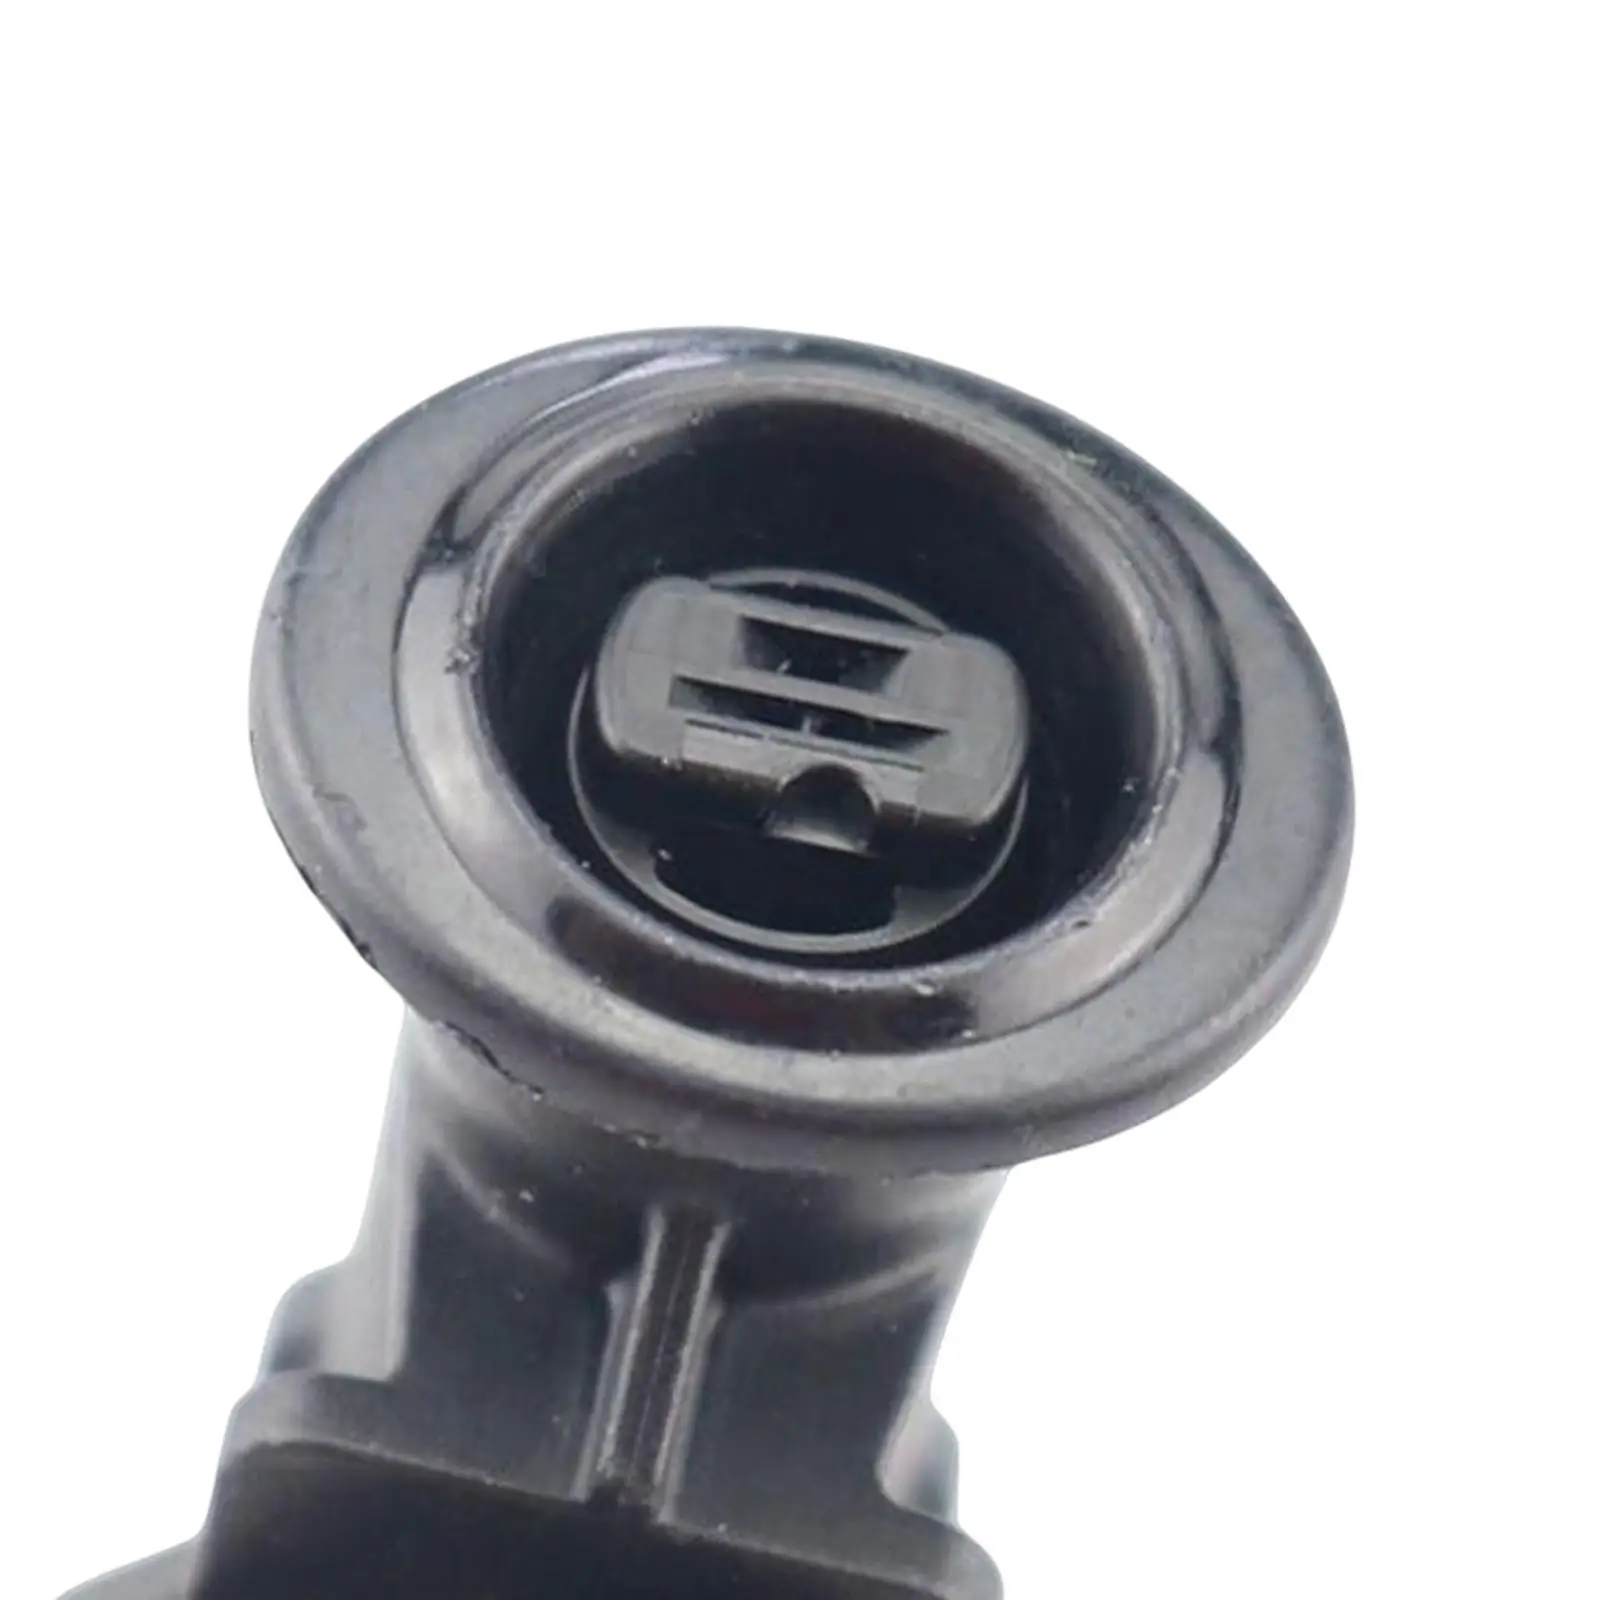 Windshield Washer Nozzle Wear Resistant High Performance Wiper Washer Spray Jet